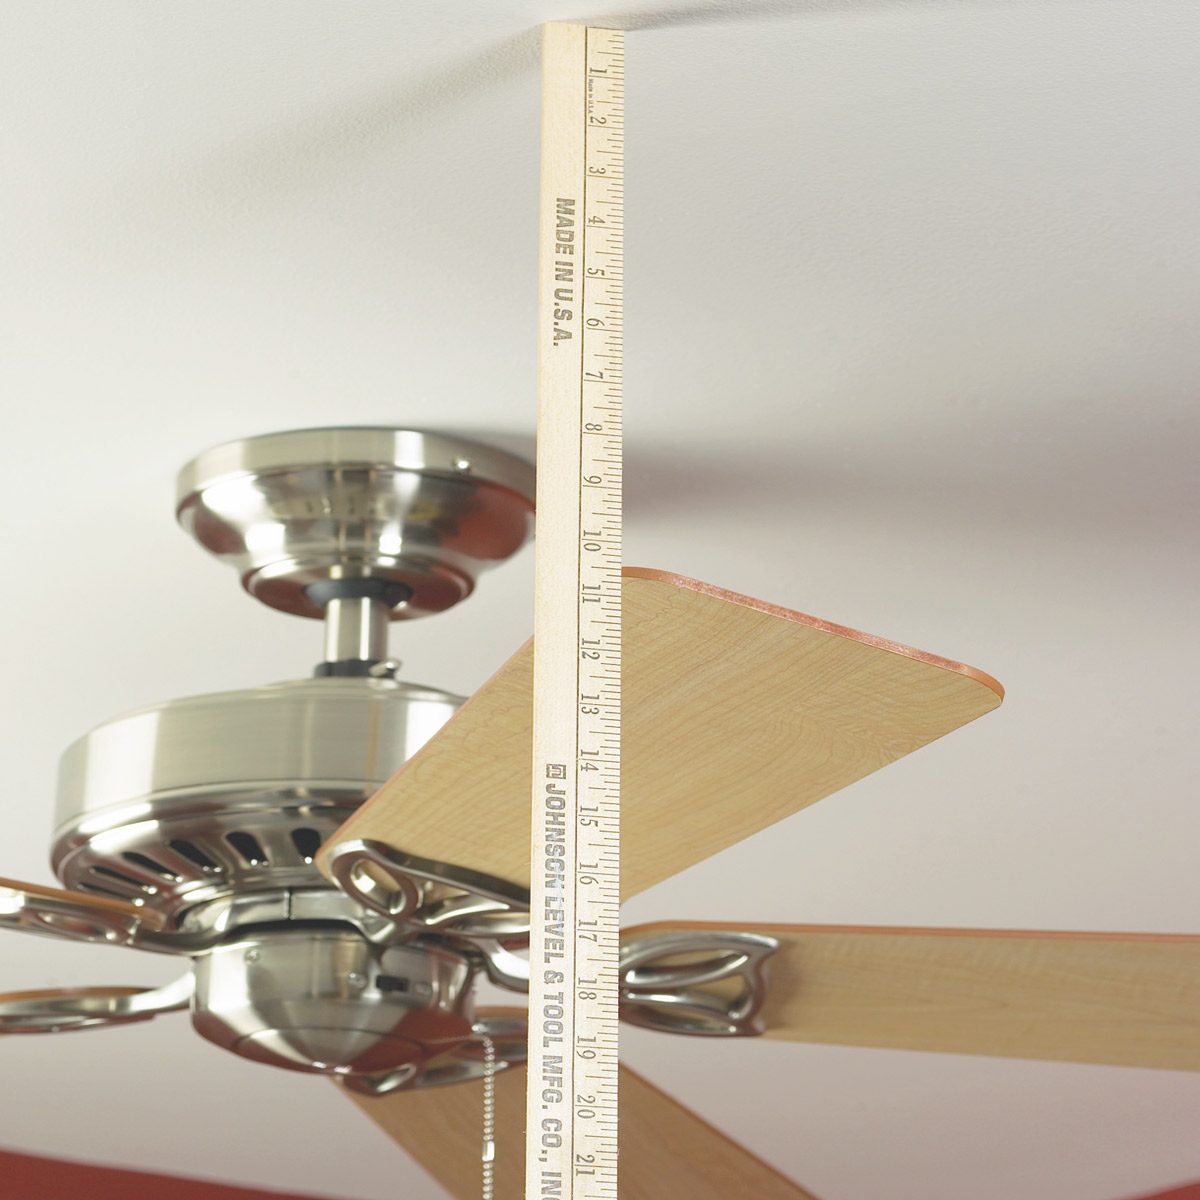 Troubleshoot and Fix an Off-Kilter Ceiling Fan